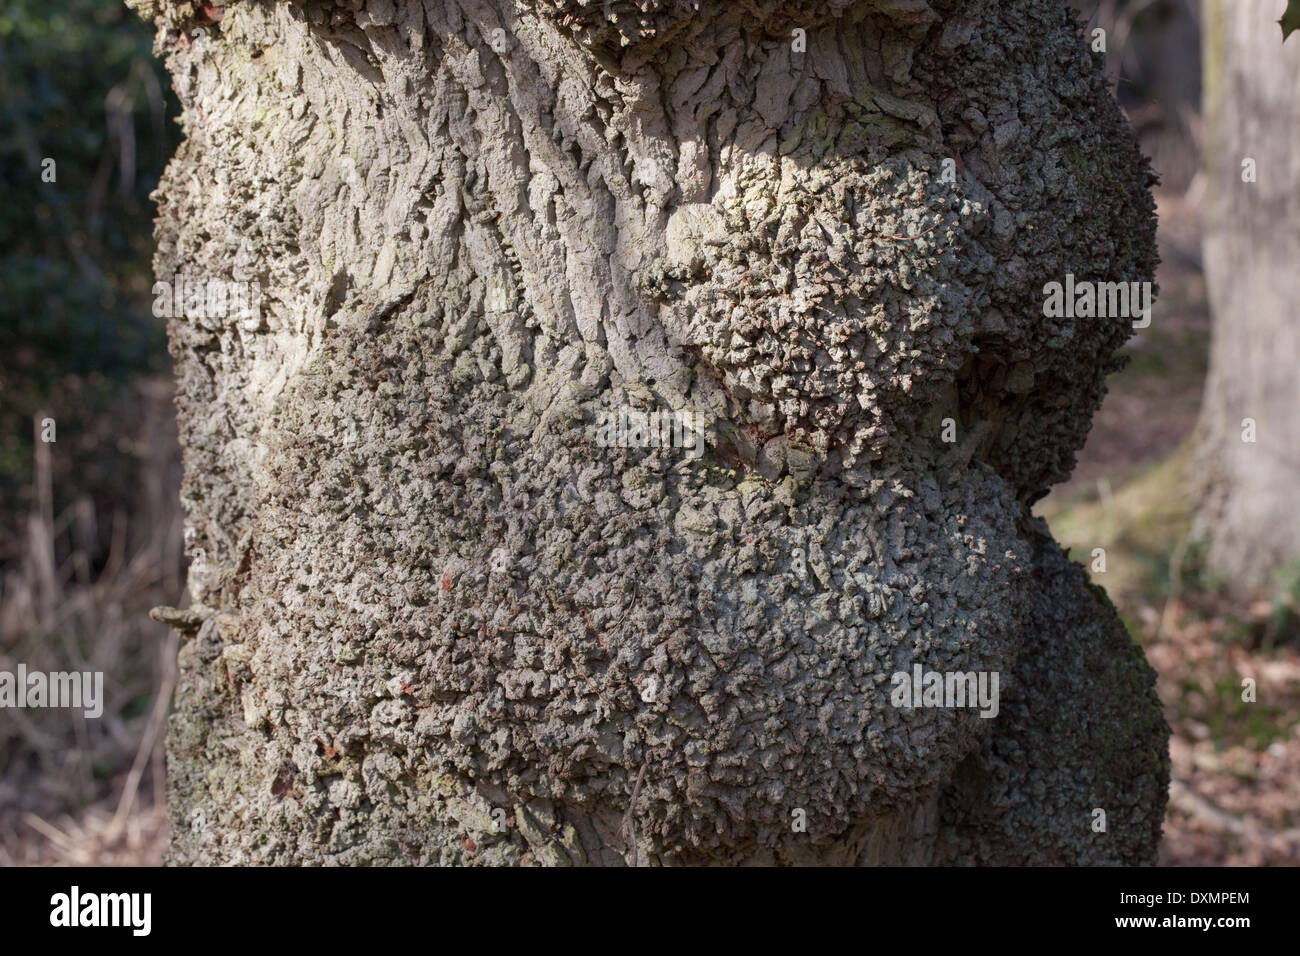 Common, Pedunculate or English Oak (Quercus robur). Trunk of a mature tree. Showing abnormal, textured bark towards the base. Stock Photo